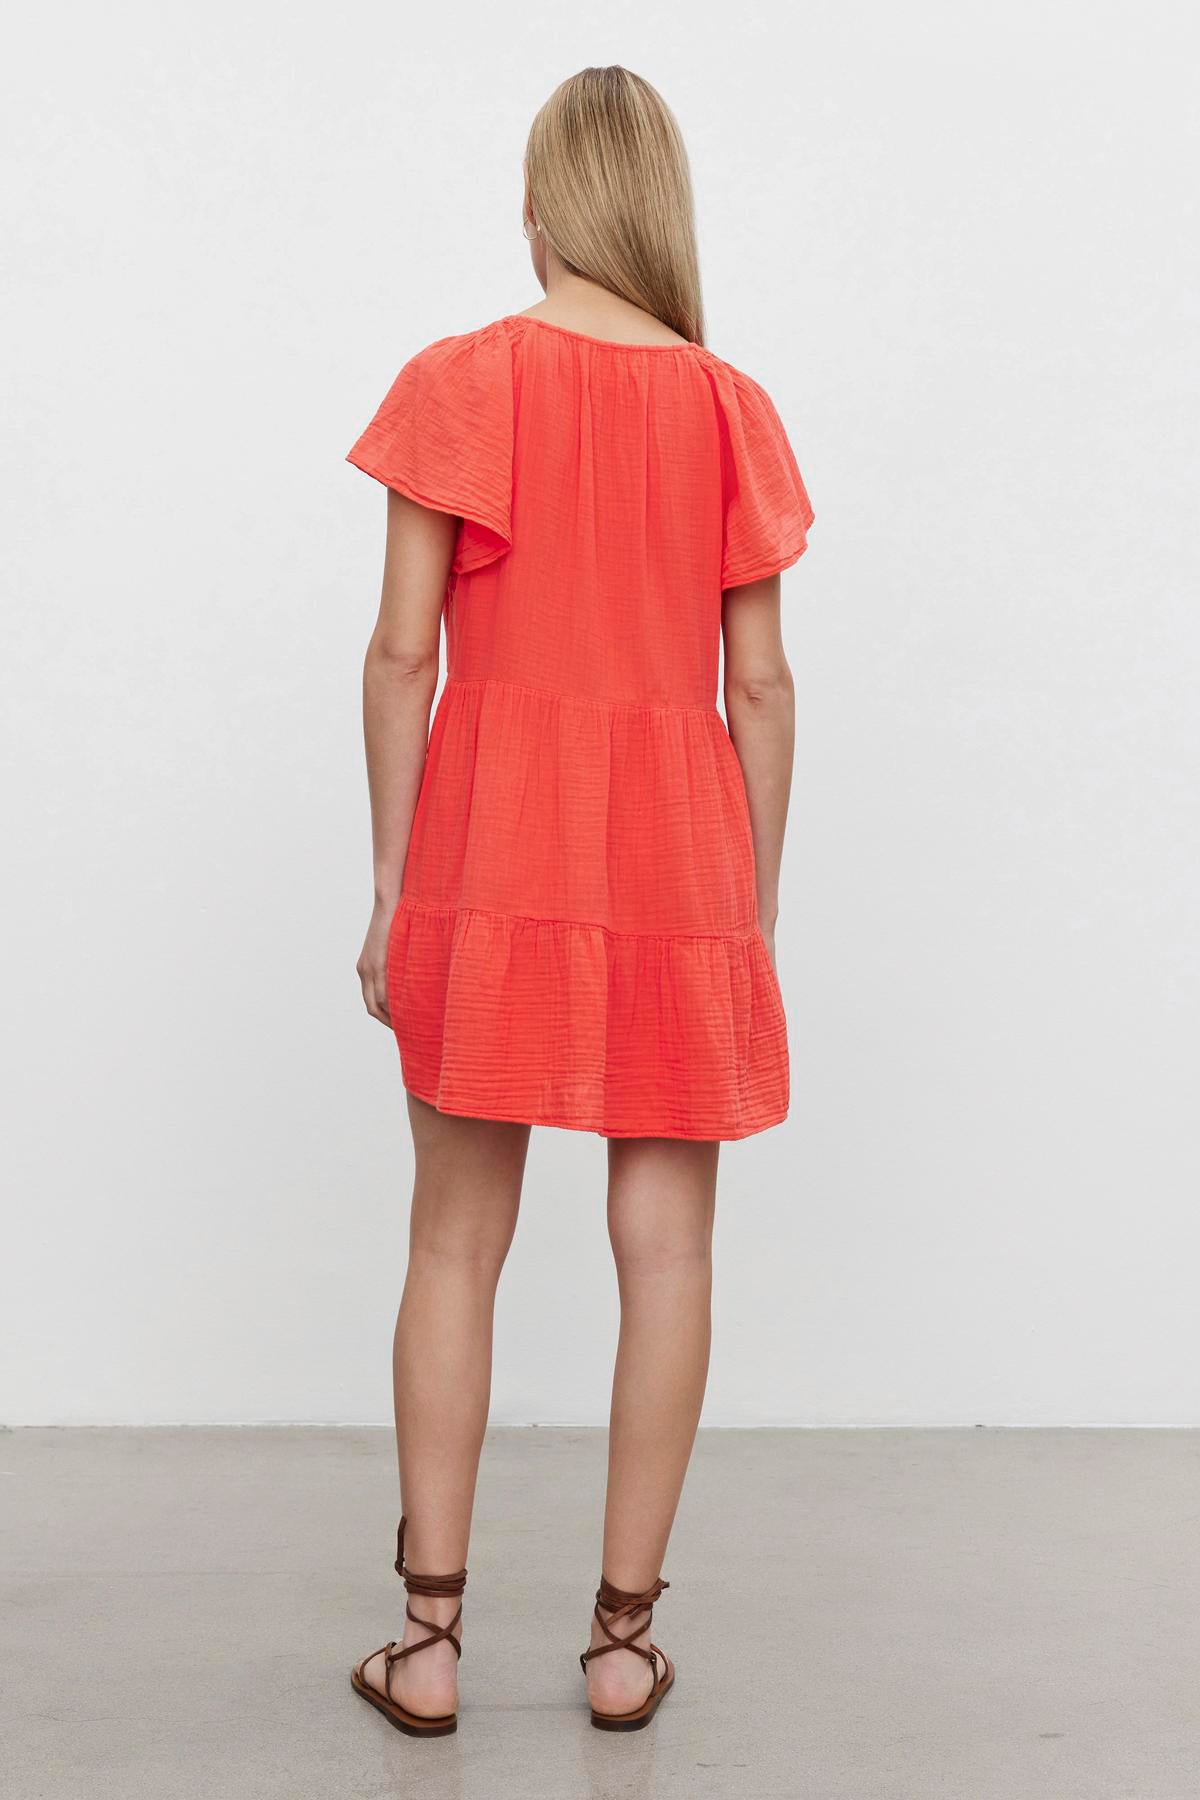 A woman from behind wearing a bright orange, short-sleeved Velvet by Graham & Spencer ELEANOR COTTON GAUZE TIERED DRESS, standing in a room with a white wall.-36532828635329